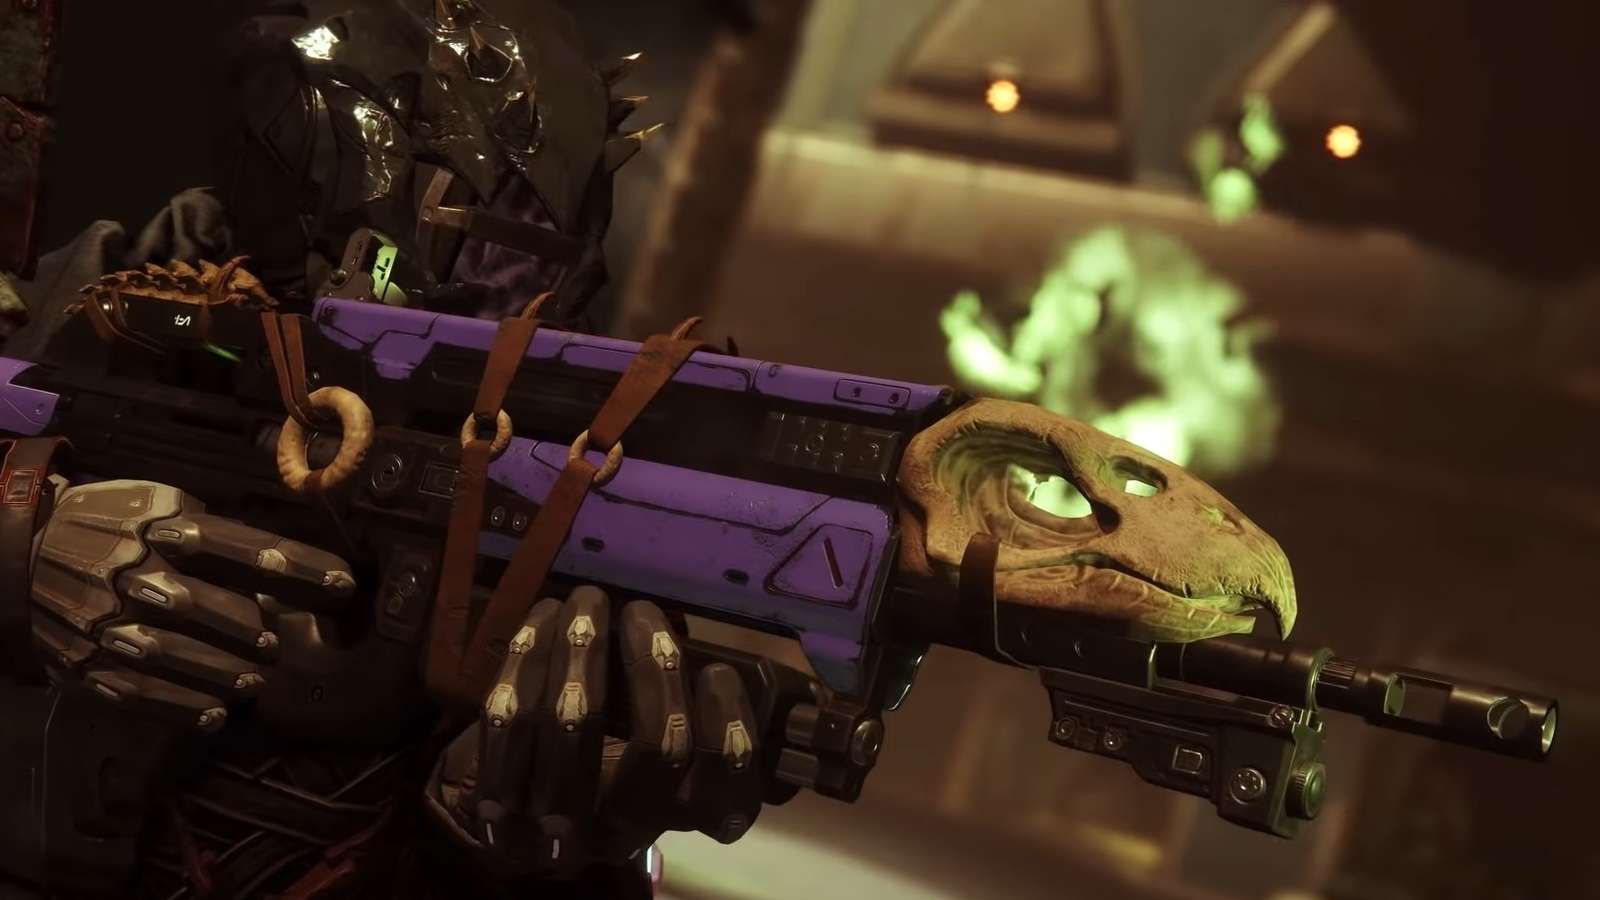 Guardian aiming in with Bad Juju Exotic Pulse Rifle in Destiny 2.